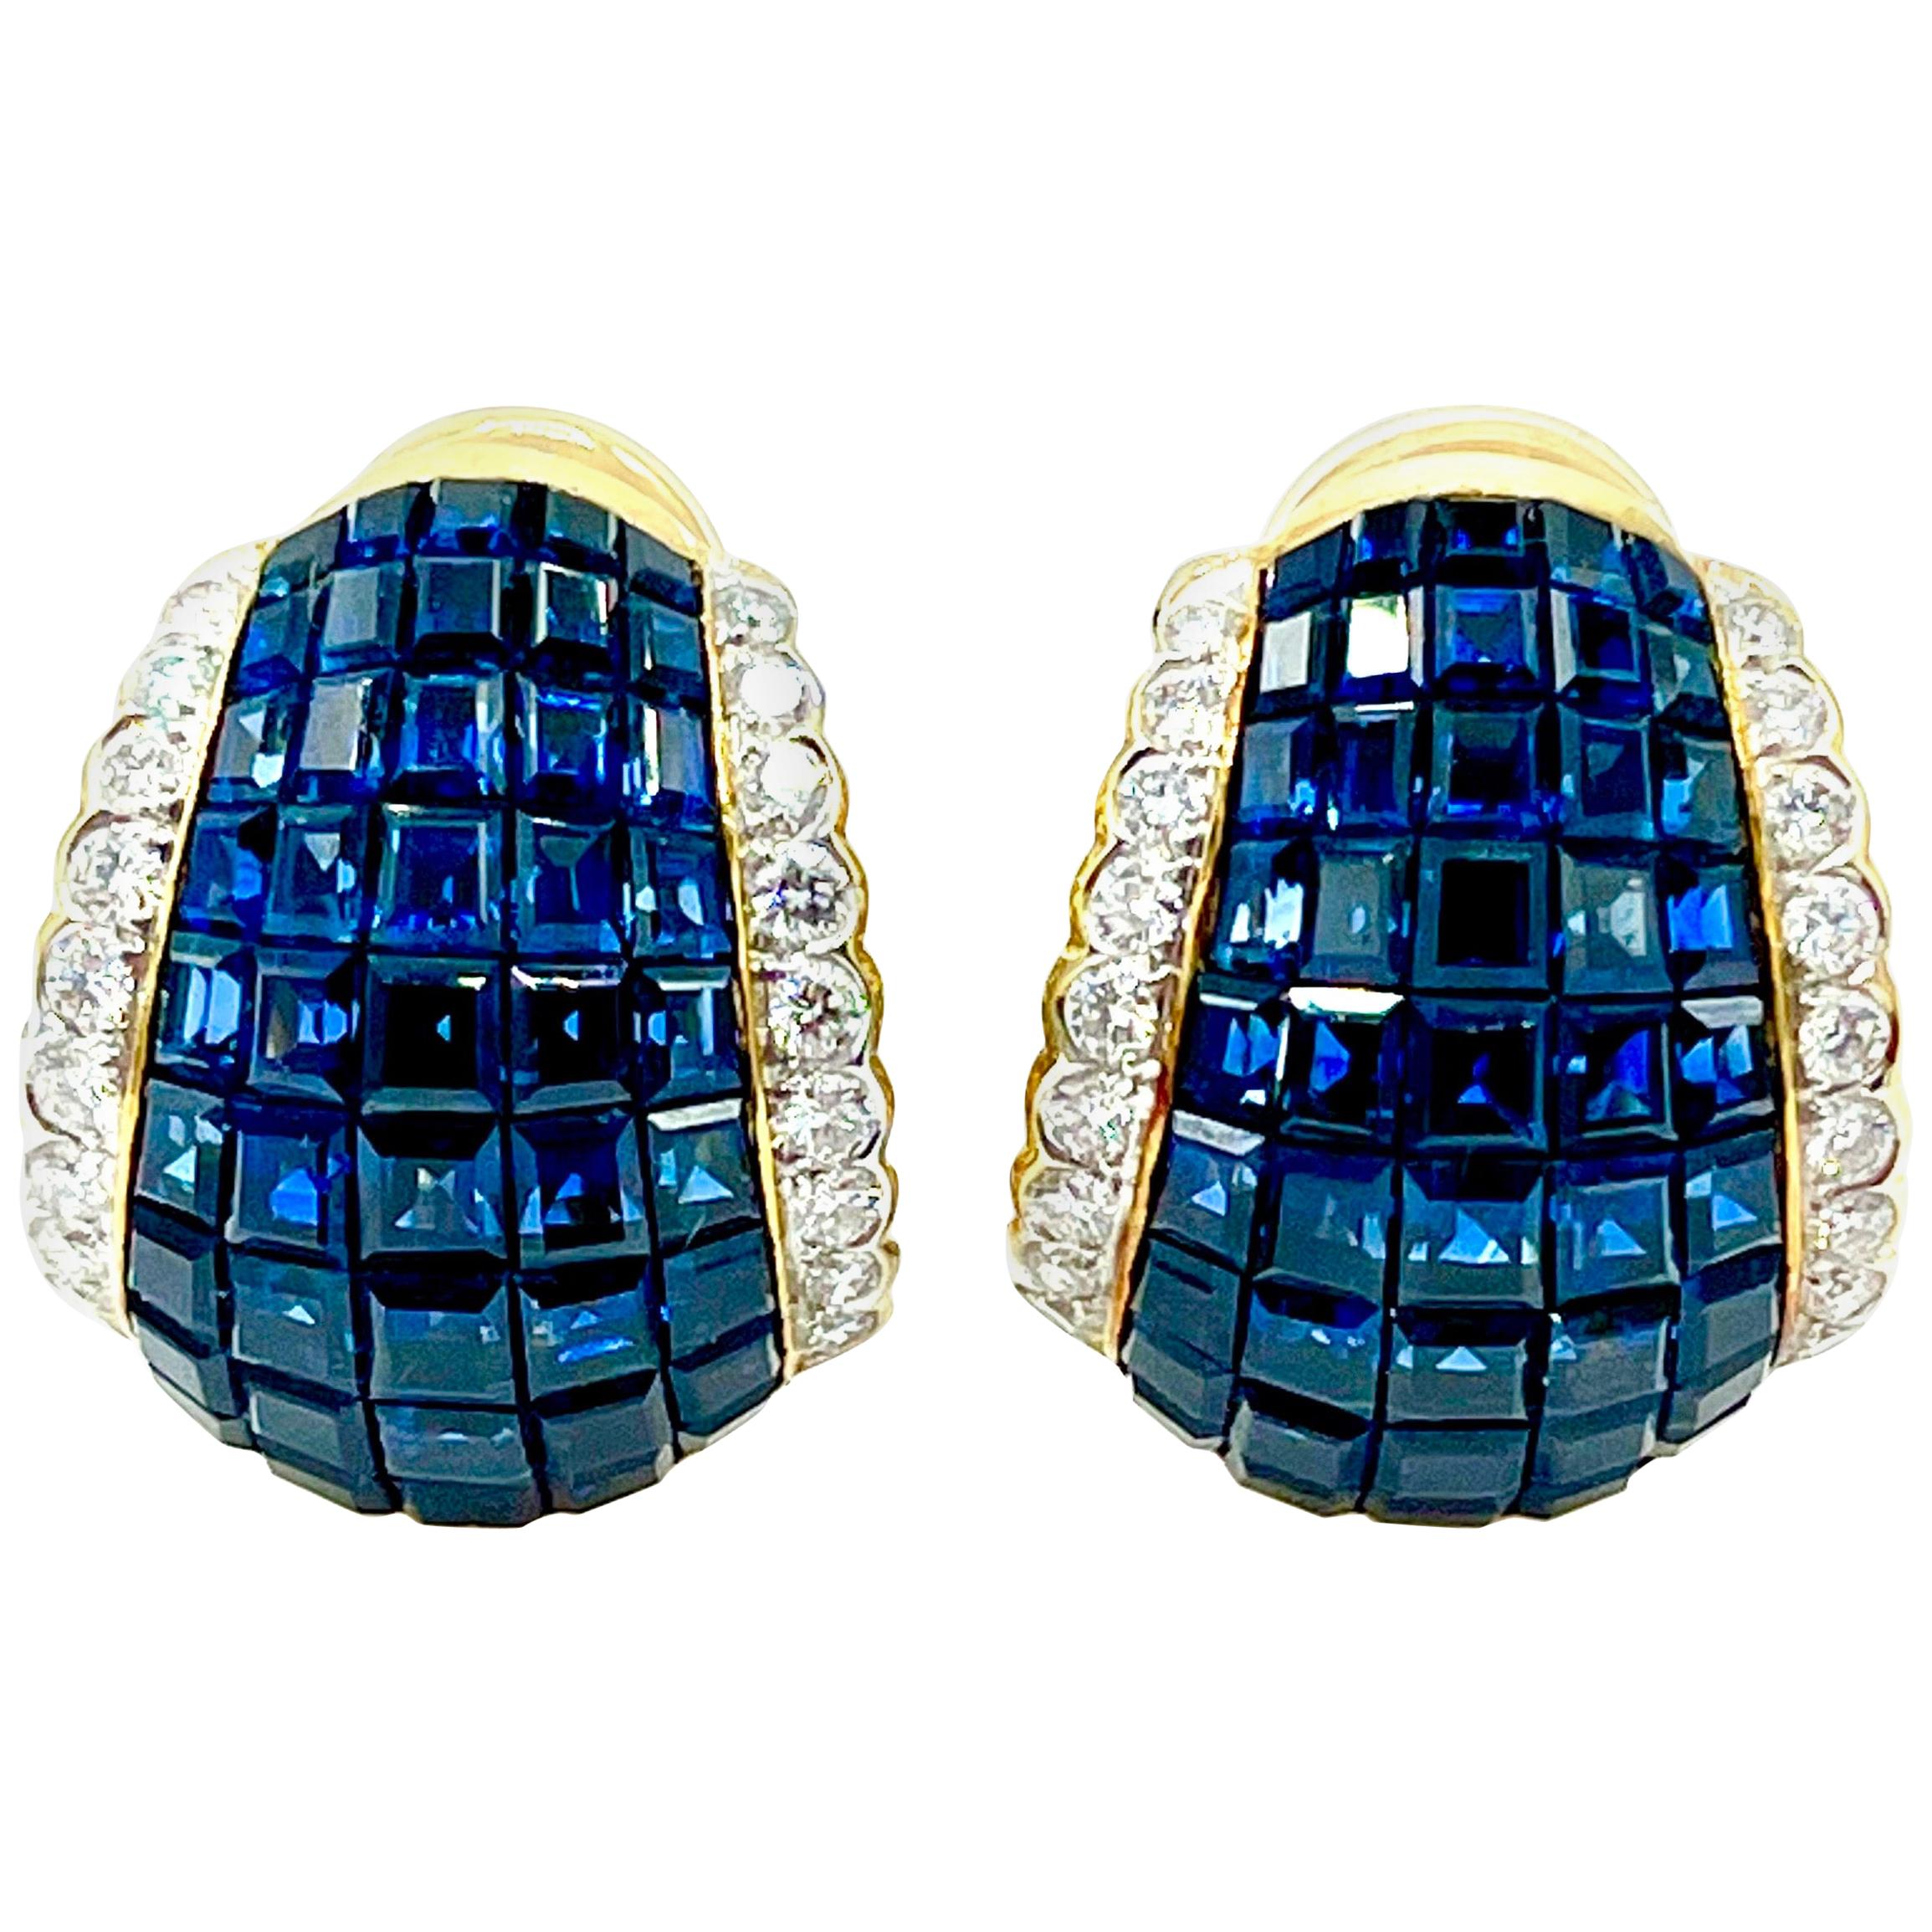 8.00 Carat Invisible Set Sapphire and Diamond Clip Earrings with Fold Down Post